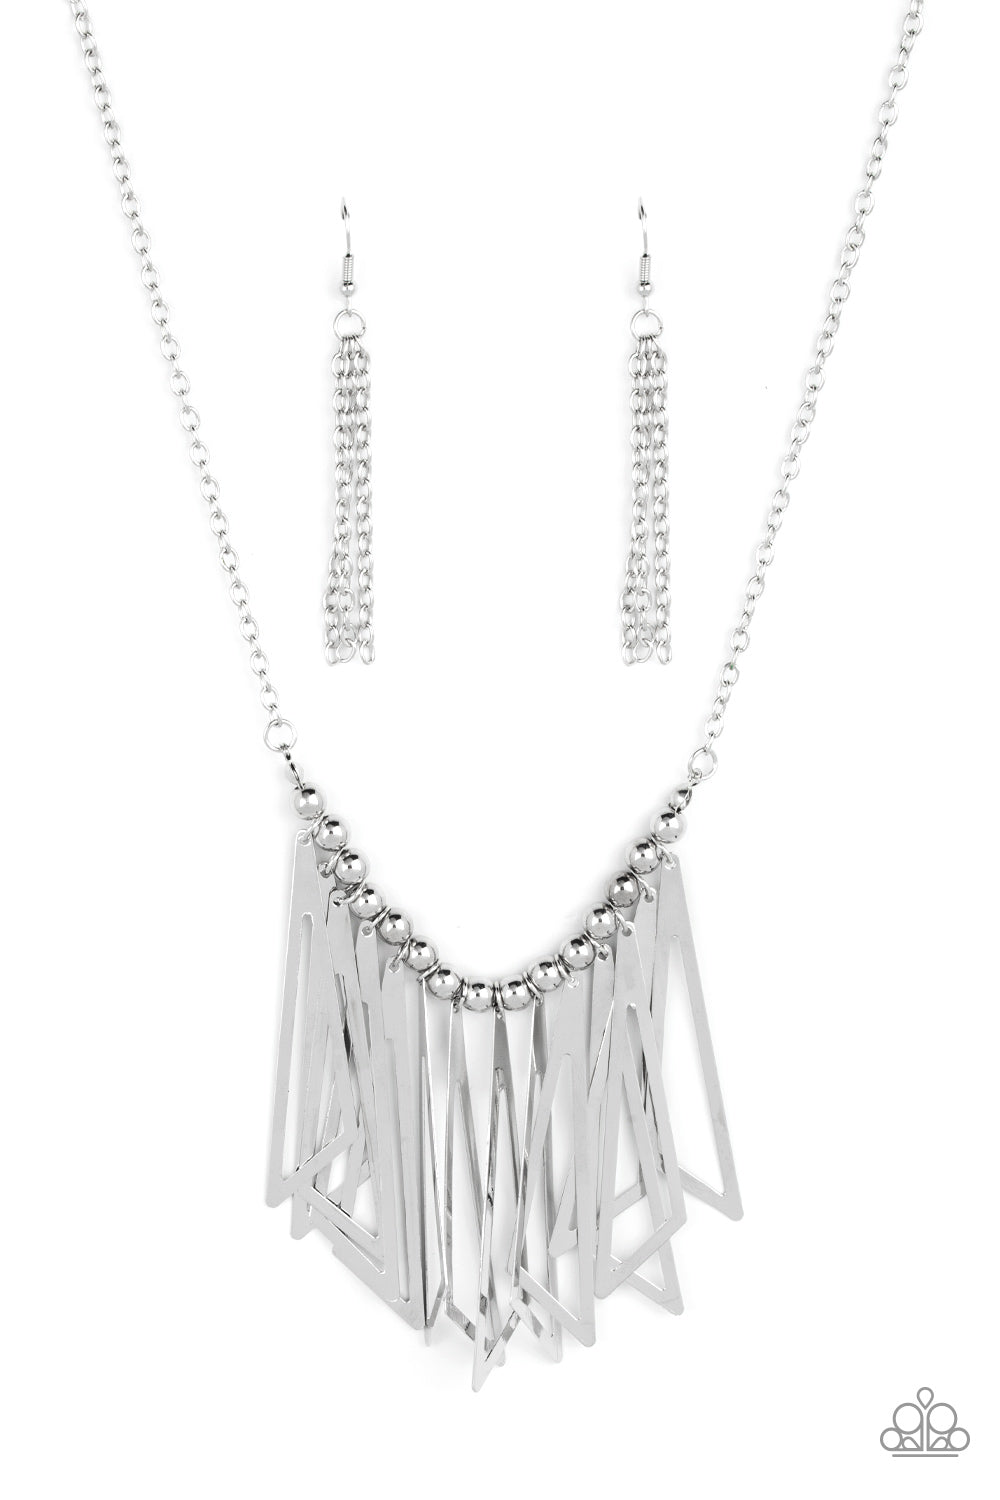 Industrial Jungle - Silver Triangular Frame Necklaces - Paparazzi Accessories flared silver triangular frames swing from a silver beaded chain below the collar, creating an intense industrial-inspired fringe at the bottom of a classic silver chain. Features an adjustable clasp closure.  Sold as one individual necklace. Includes one pair of matching earrings.